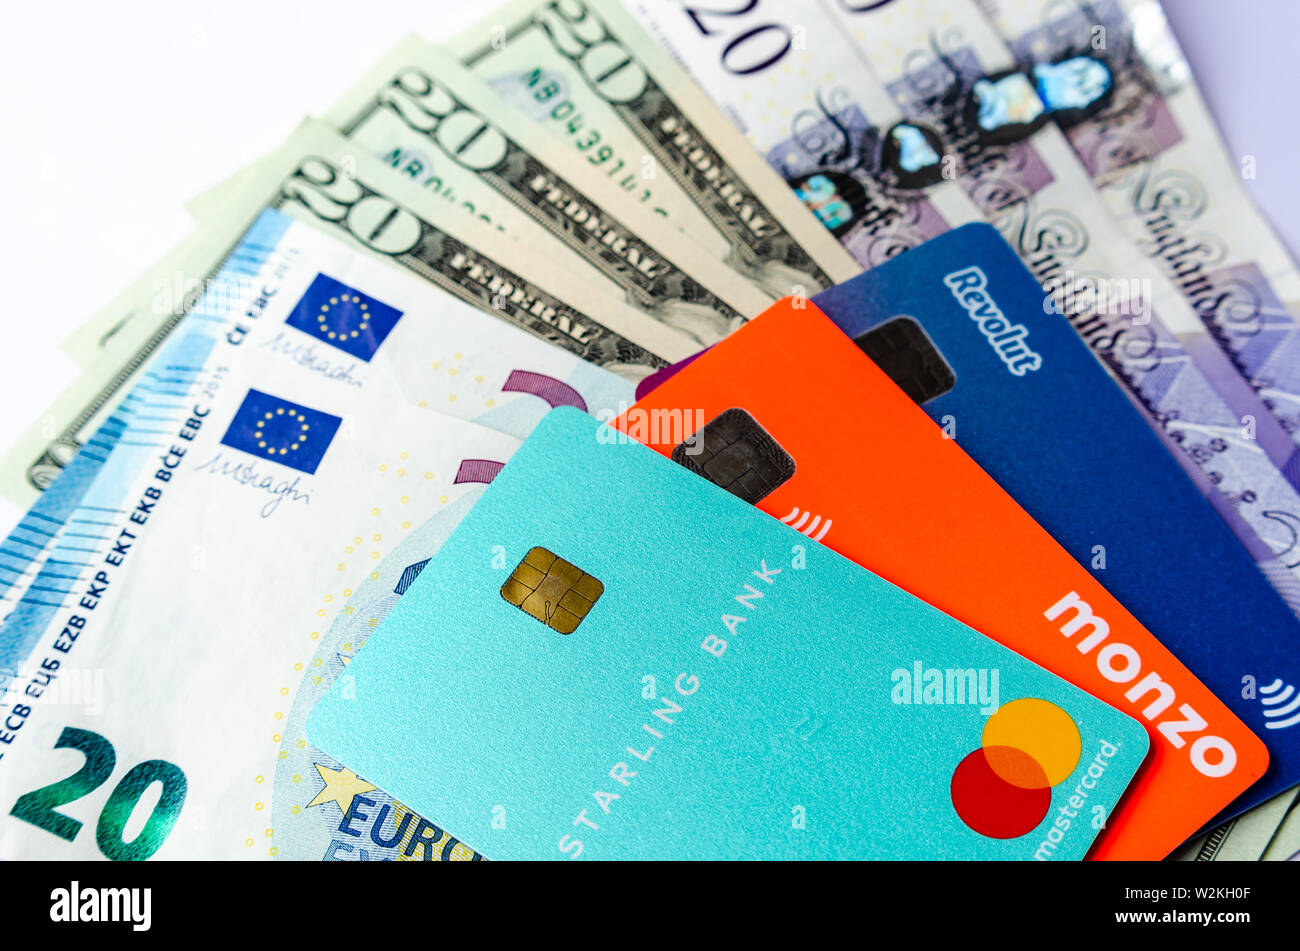 Starling, Monzo, Revolut bank cards on the cash of different countries. Cards with no fee for money exchange and multicurrency account. Stock Photo